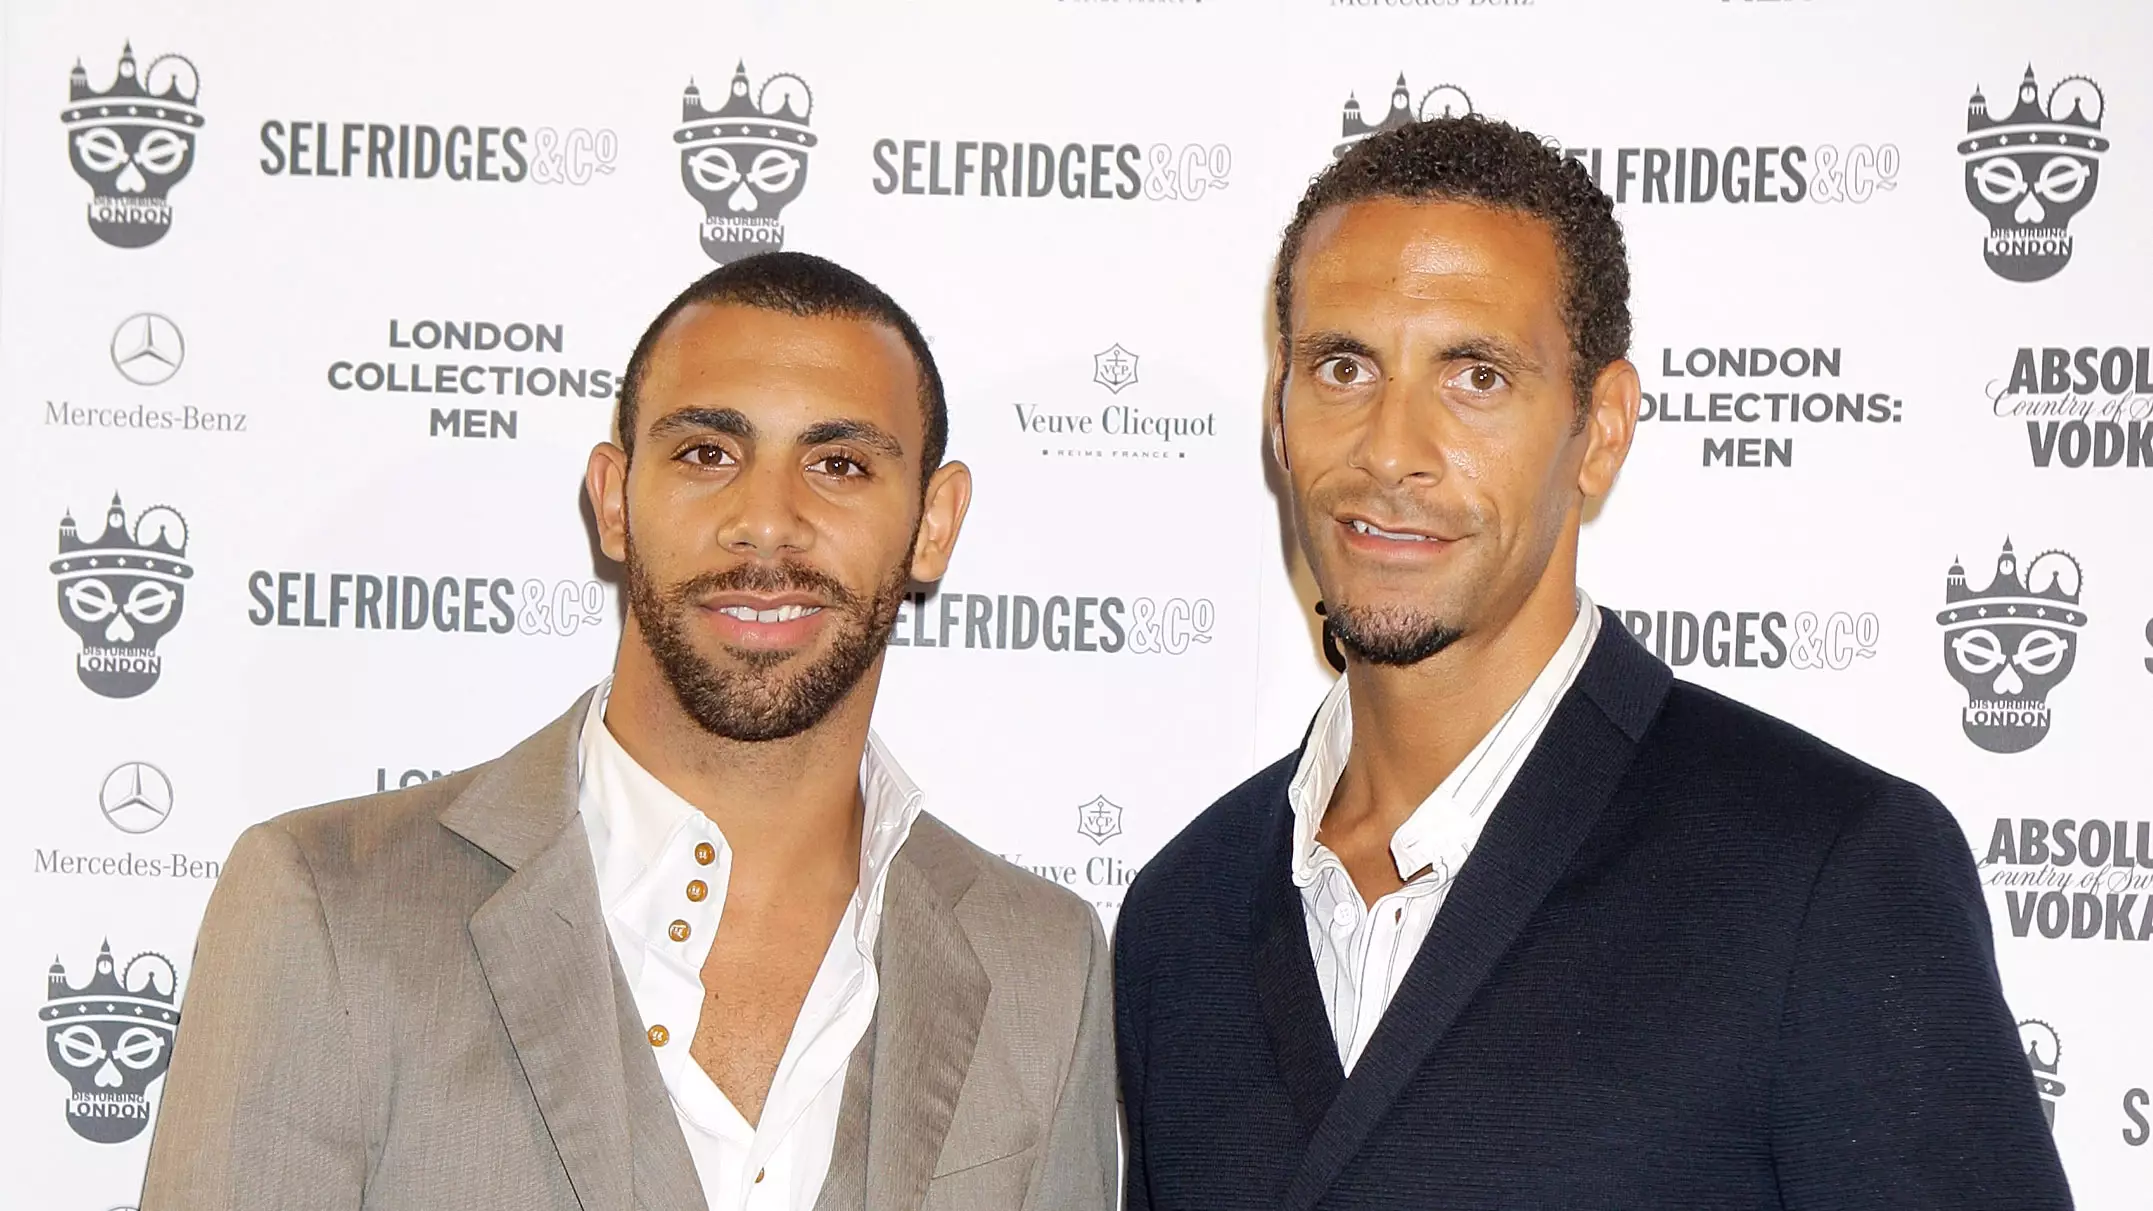 Rio And Anton Ferdinand Post Touching Tributes About Their Late Mum 